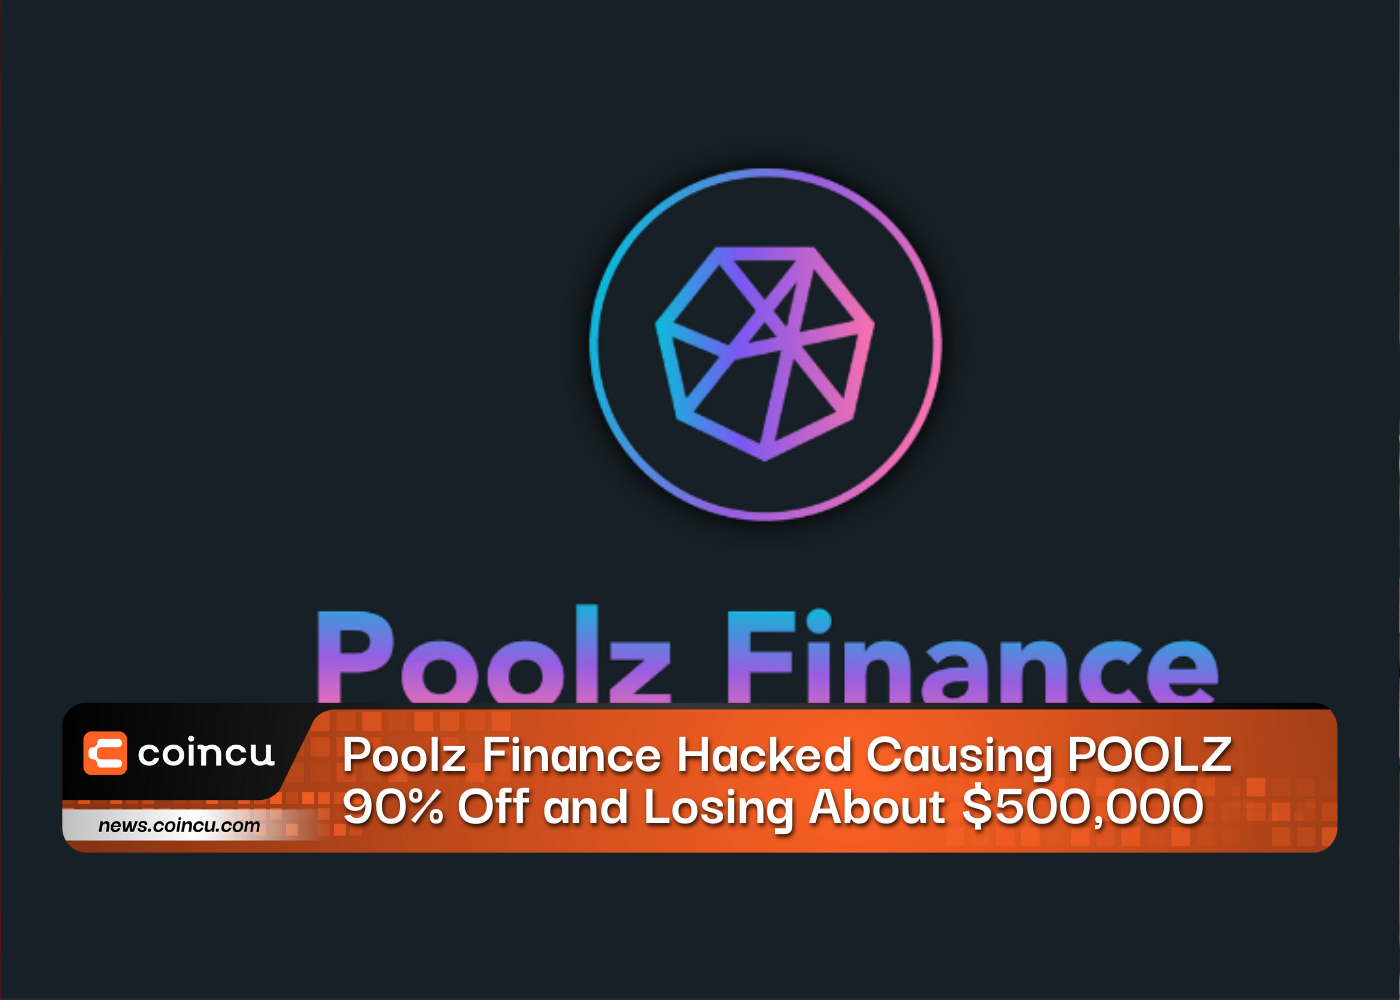 Poolz Finance Hacked Causing POOLZ 90% Off and Losing About $500,000